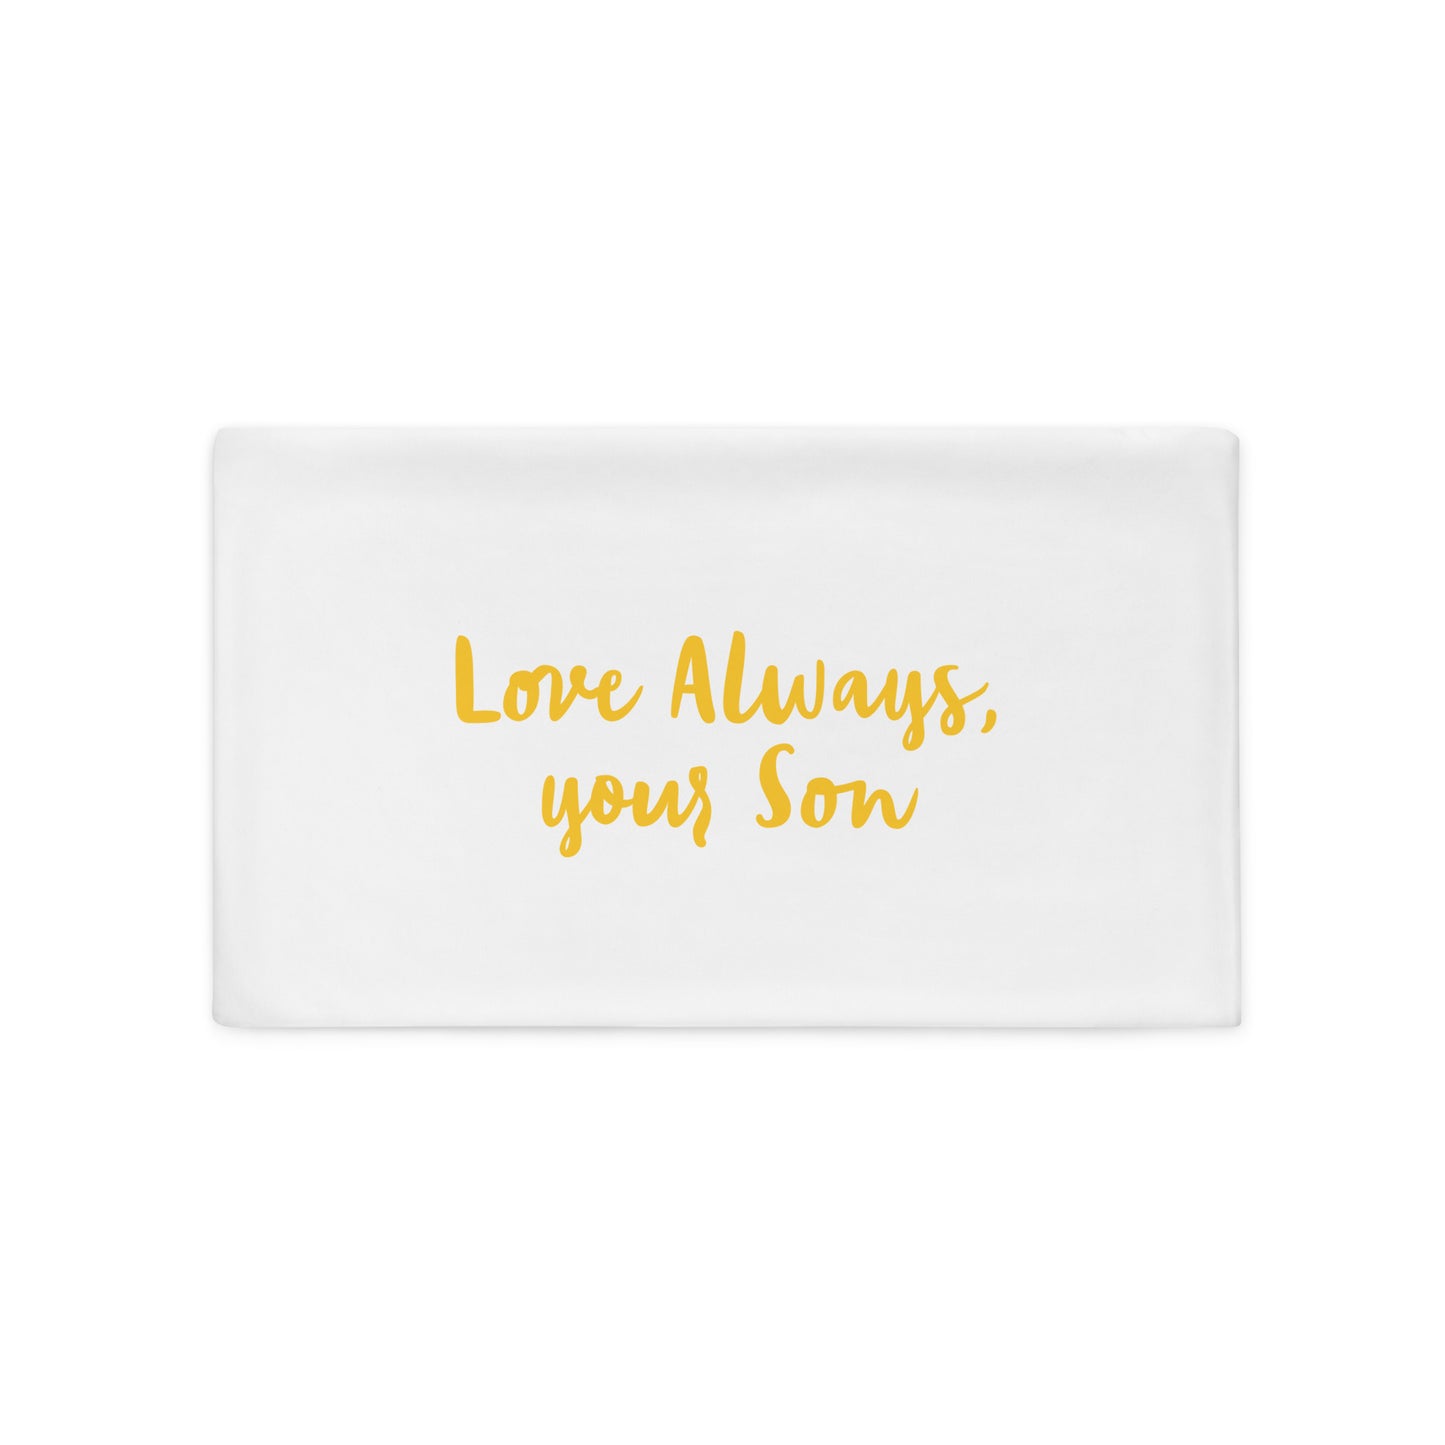 Missing you Cuddles Pillow Case